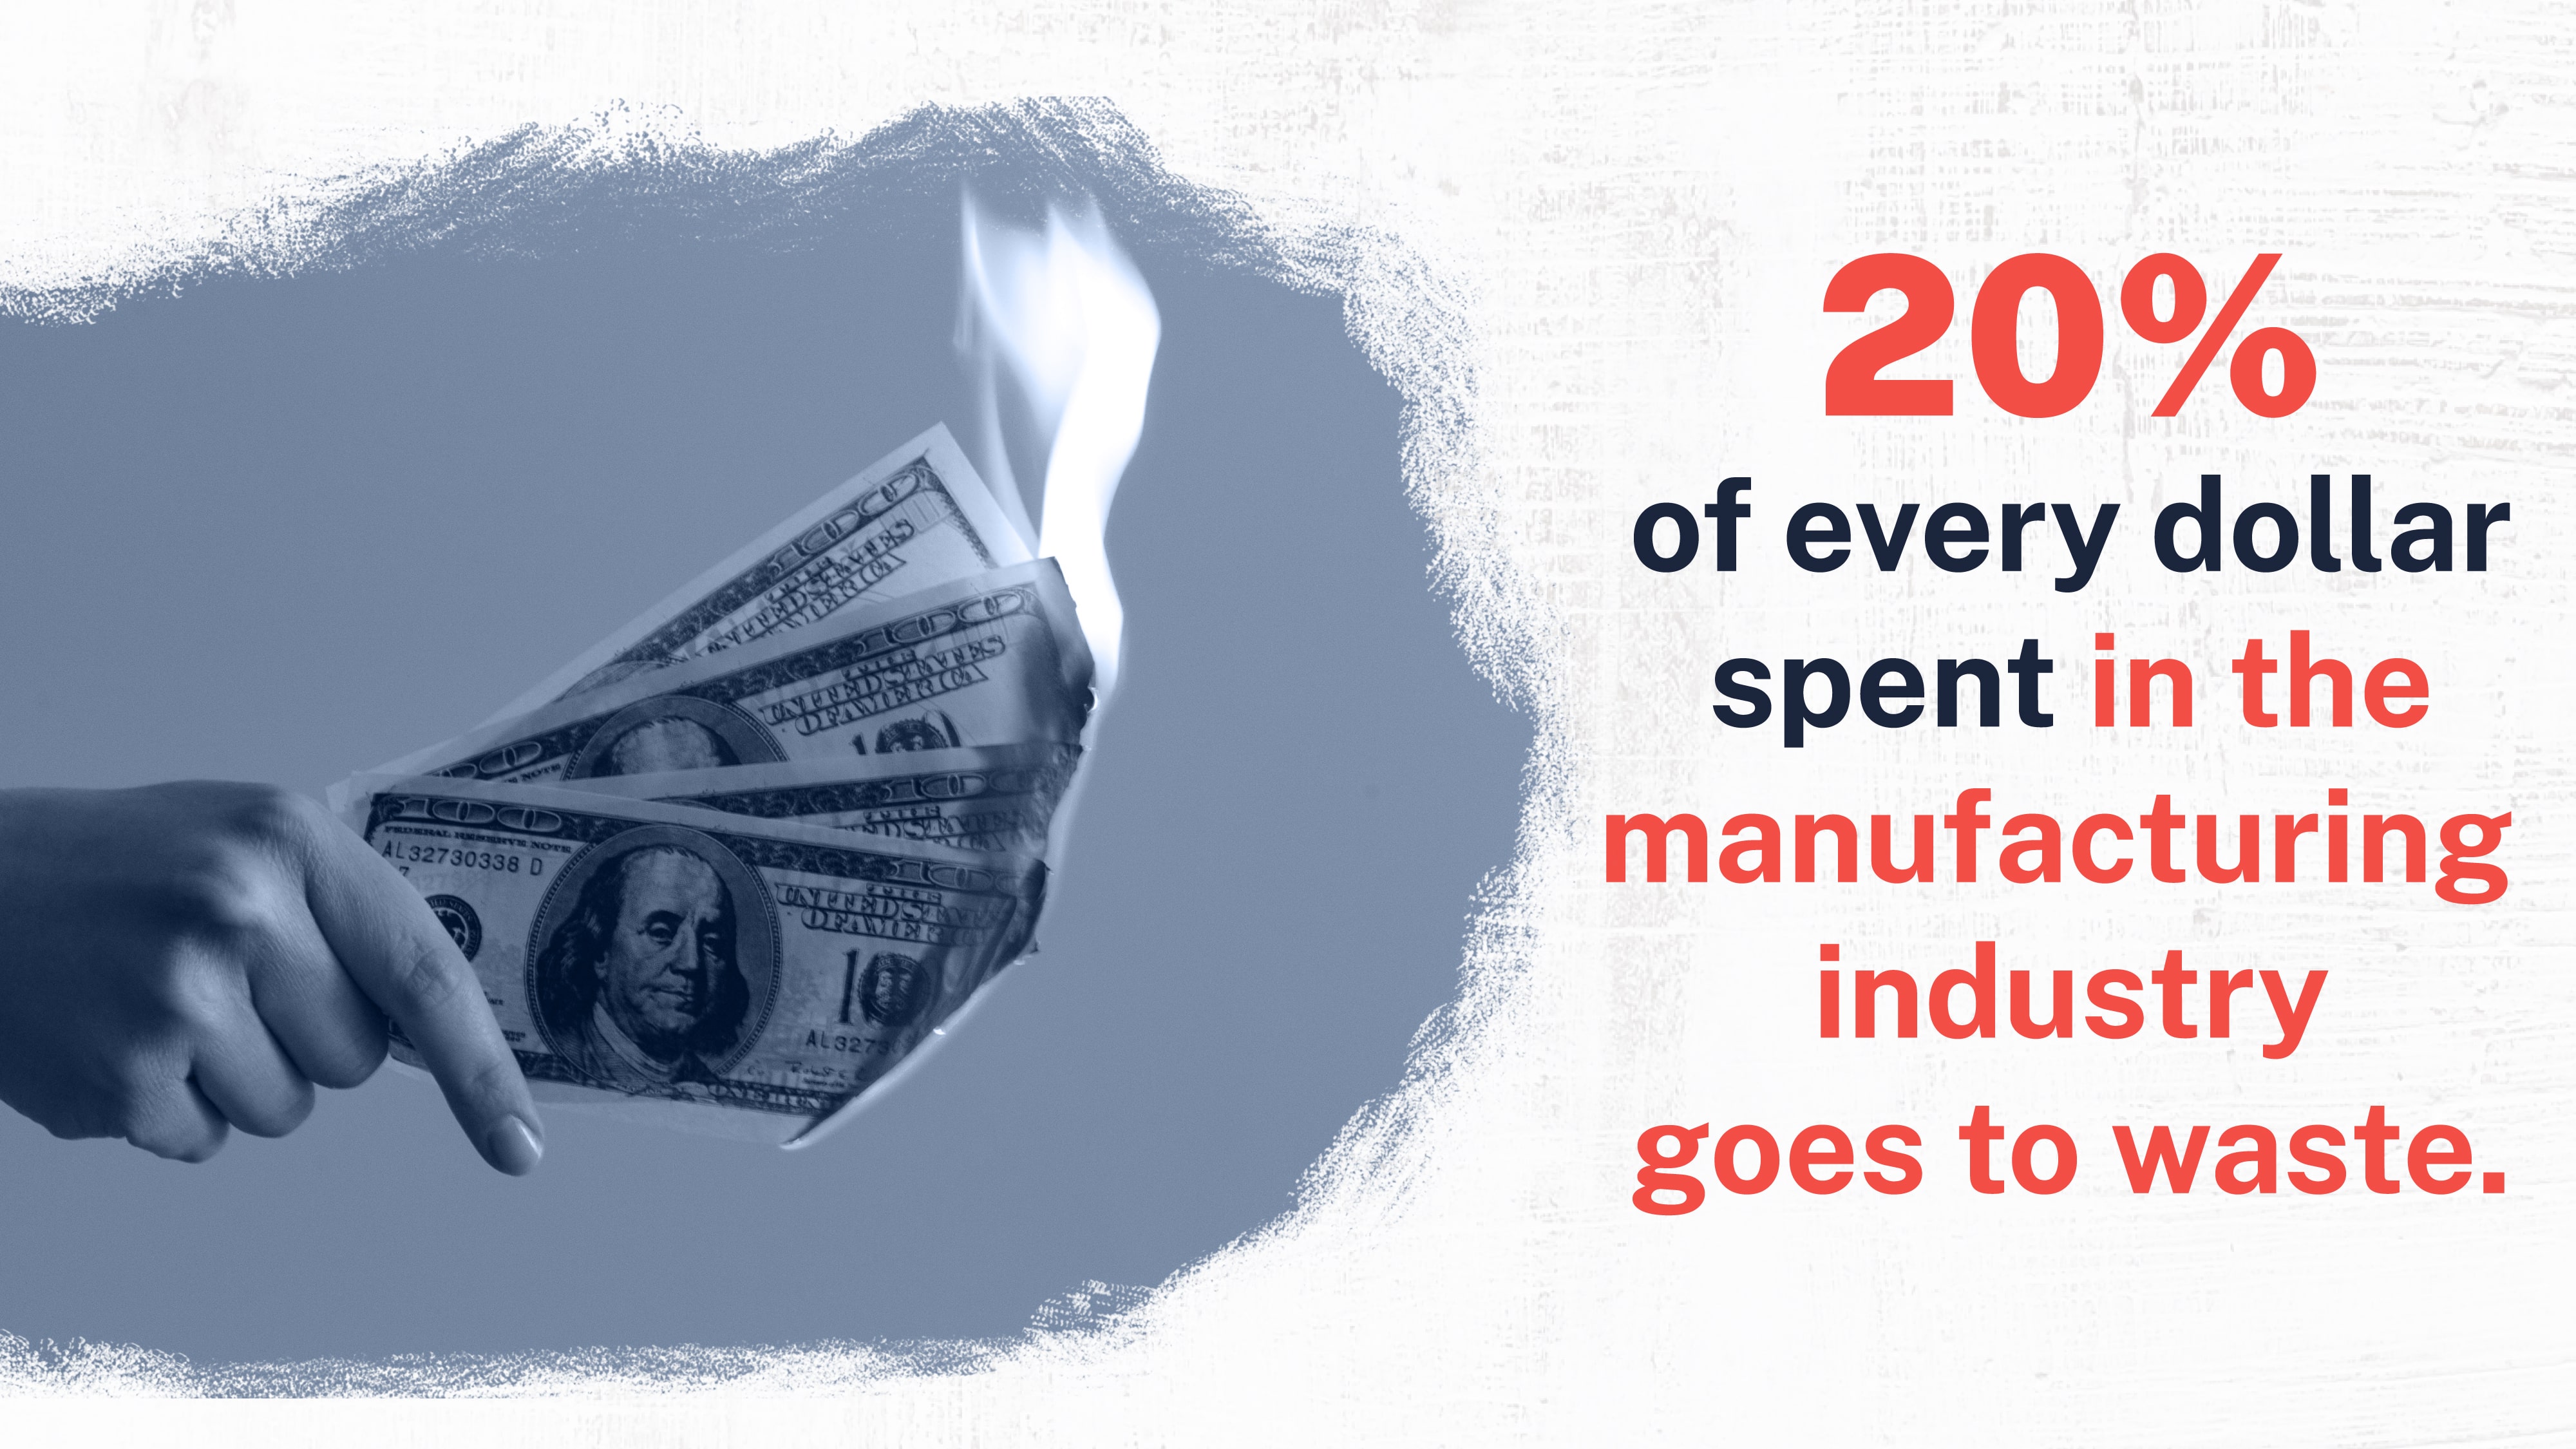 20% of manufacturing industry goes to waste.